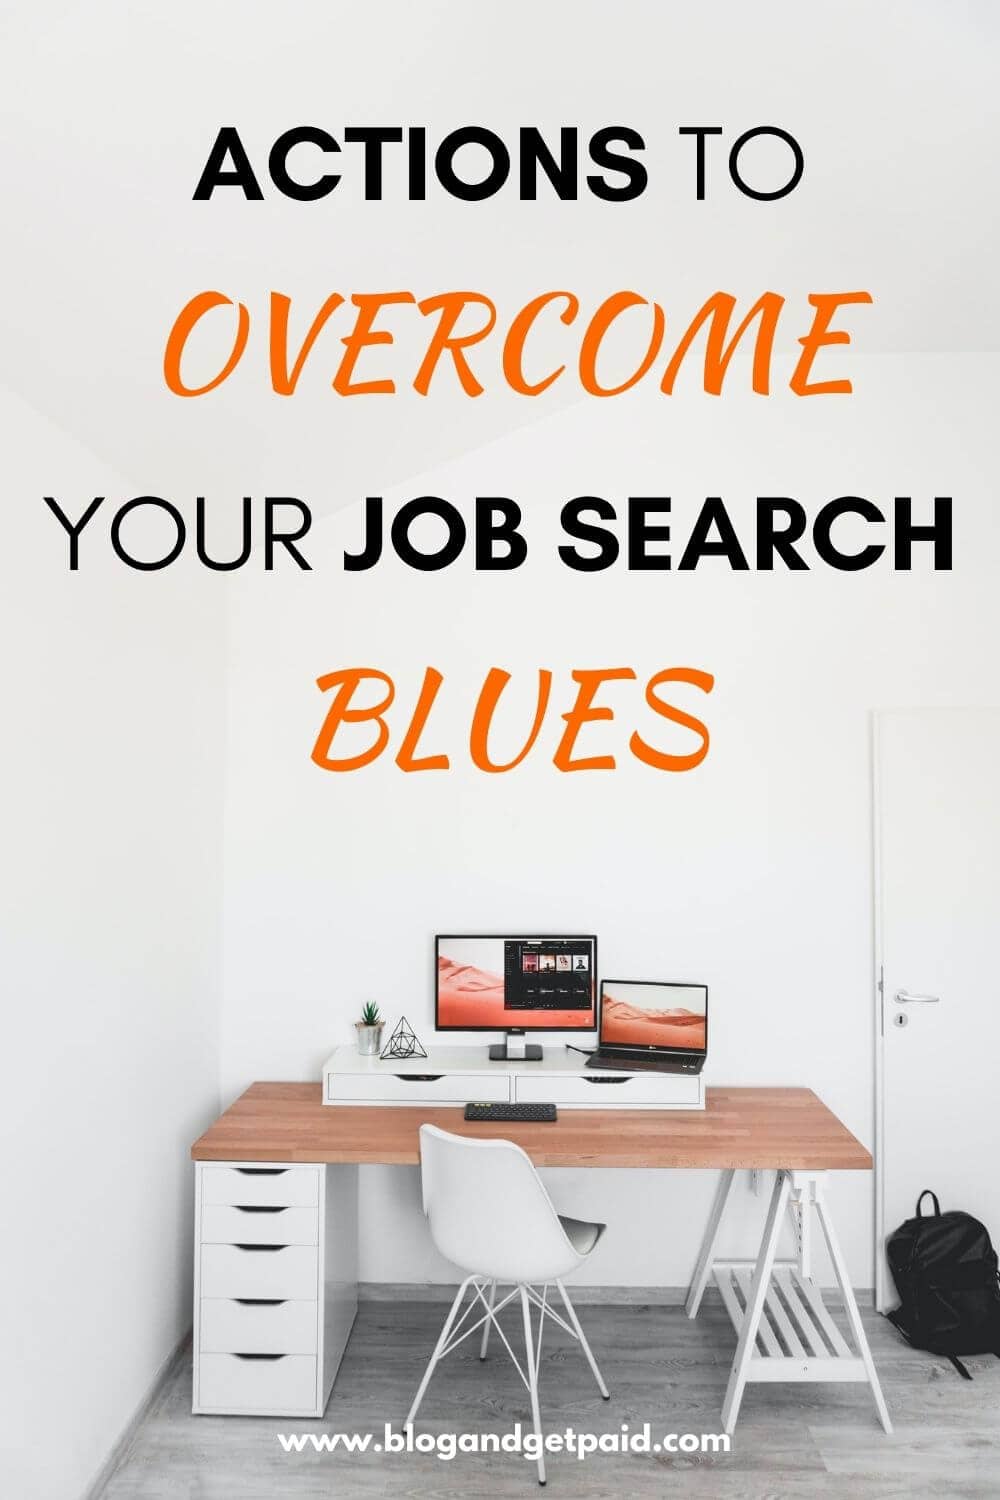 Overcome Your Job Search Blues Using Top 3 Proven Actions